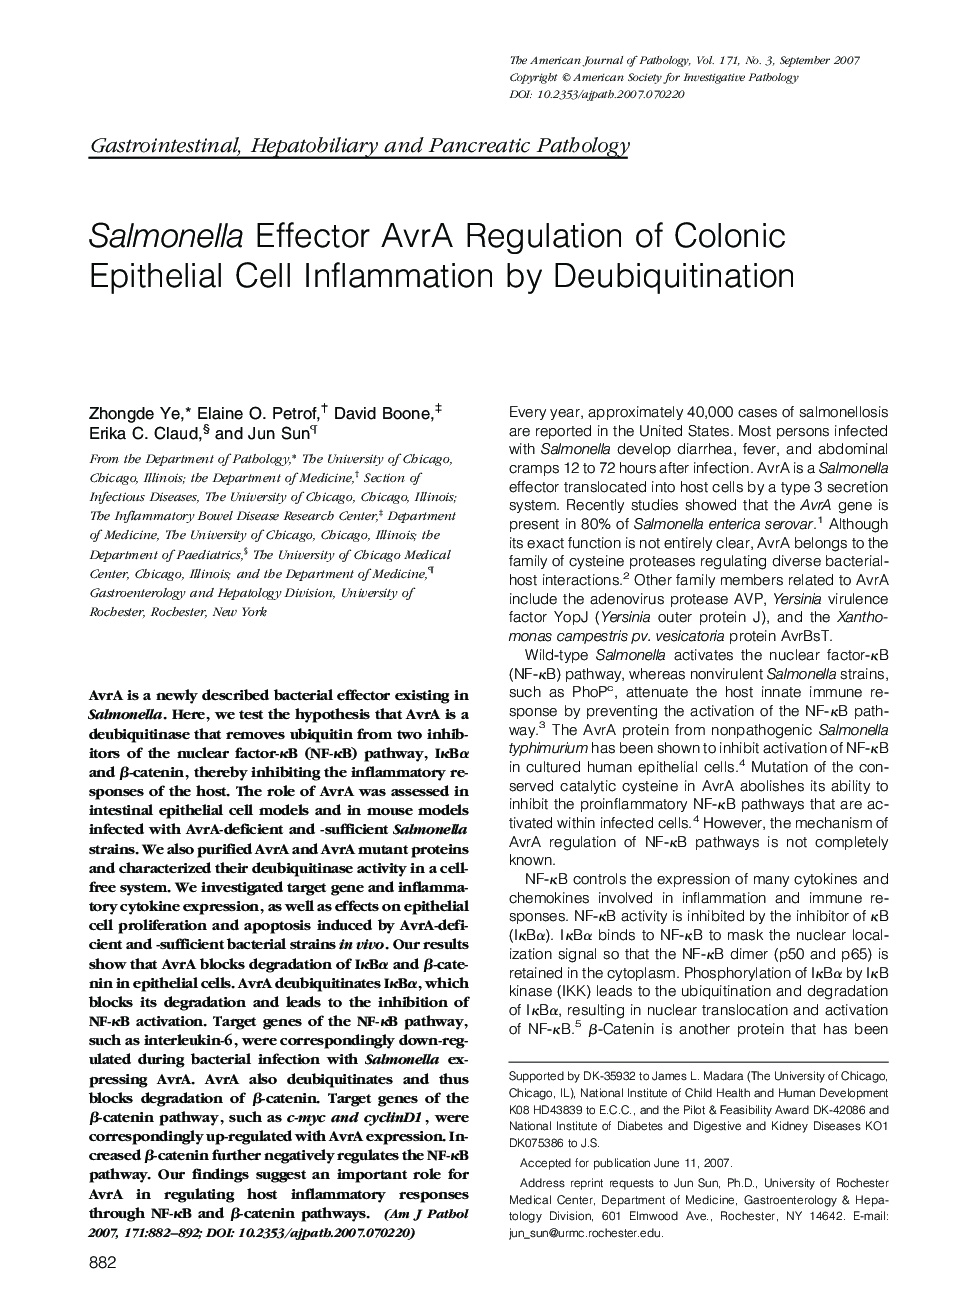 Salmonella Effector AvrA Regulation of Colonic Epithelial Cell Inflammation by Deubiquitination